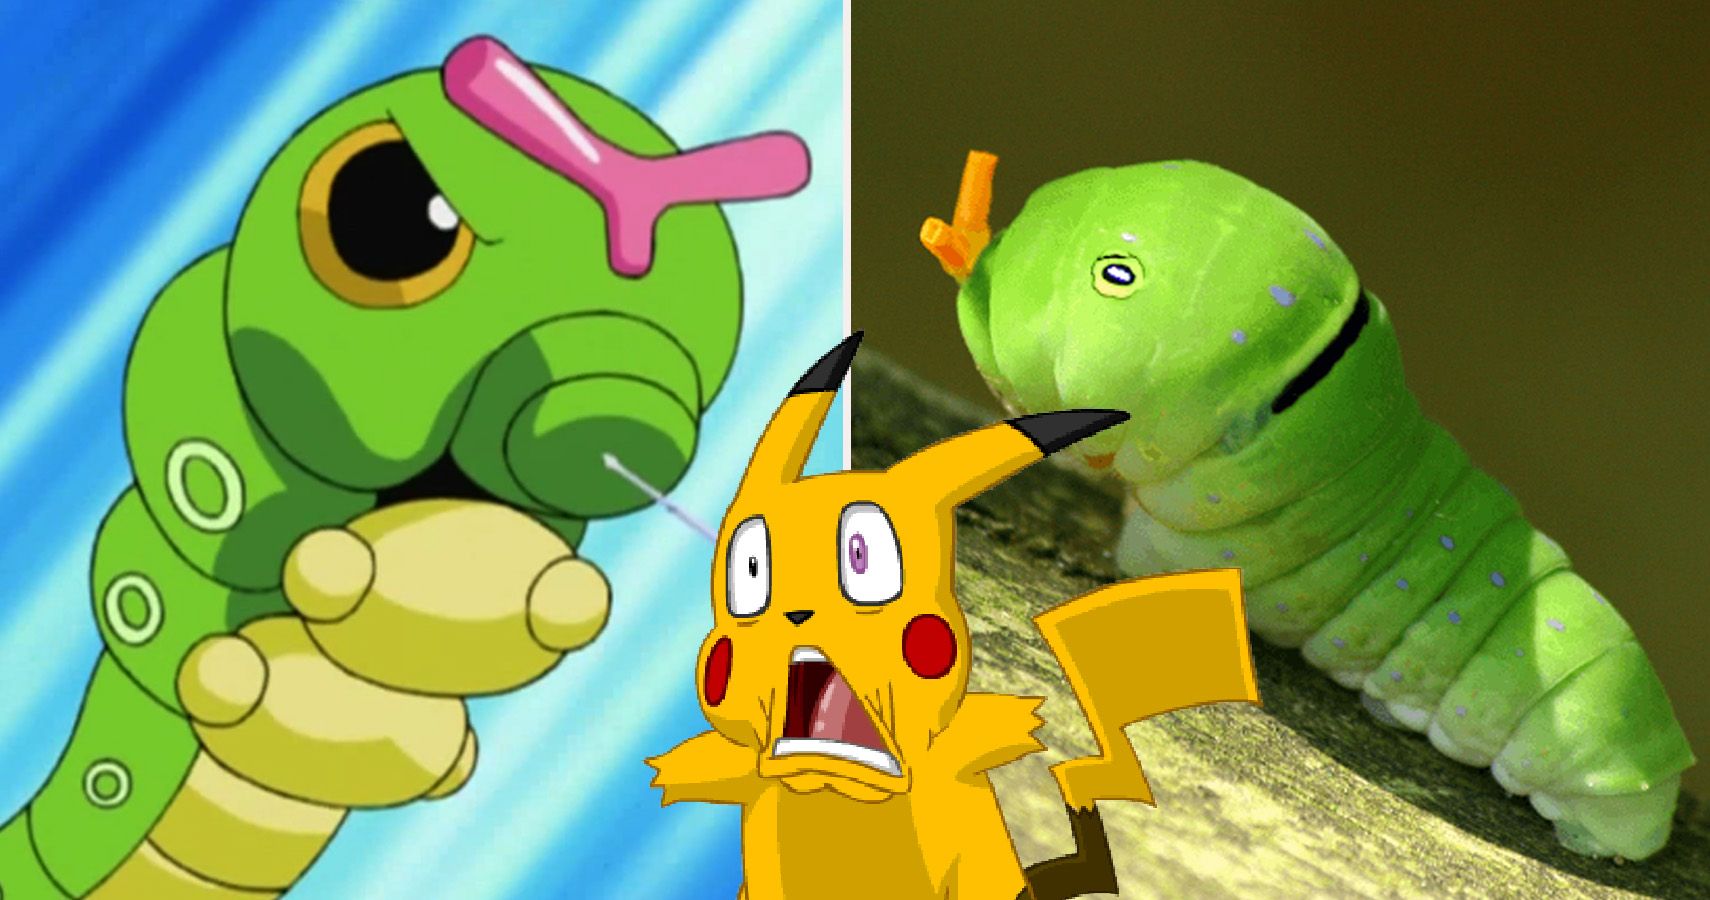 Who's That Pokémon? Pokémon You Can Catch in the Real World!